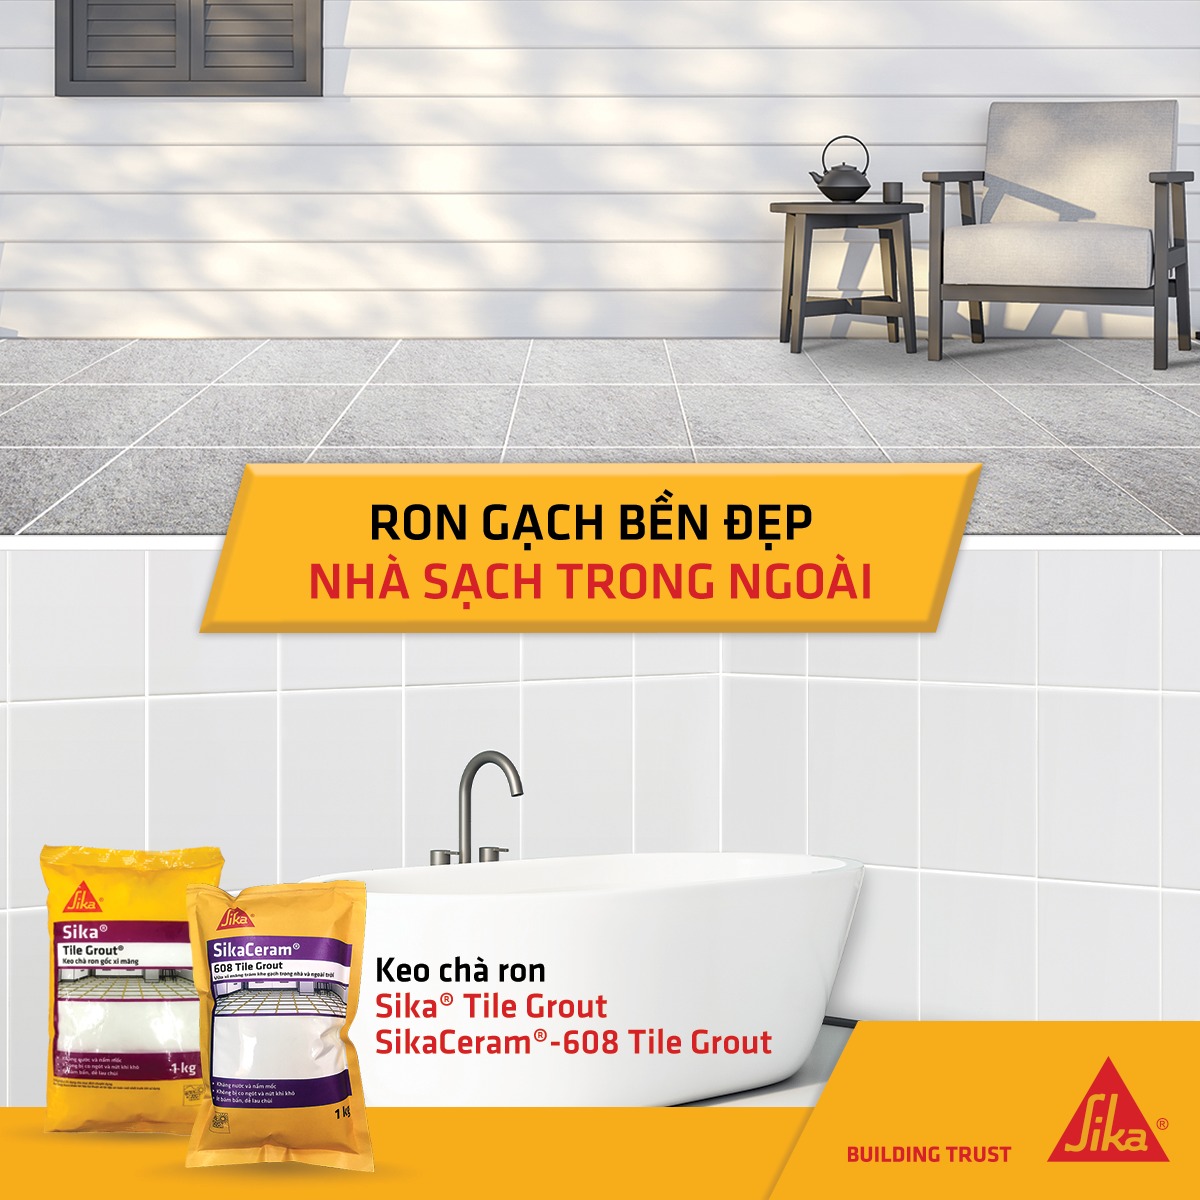 keo cha ron sika tile grout 680